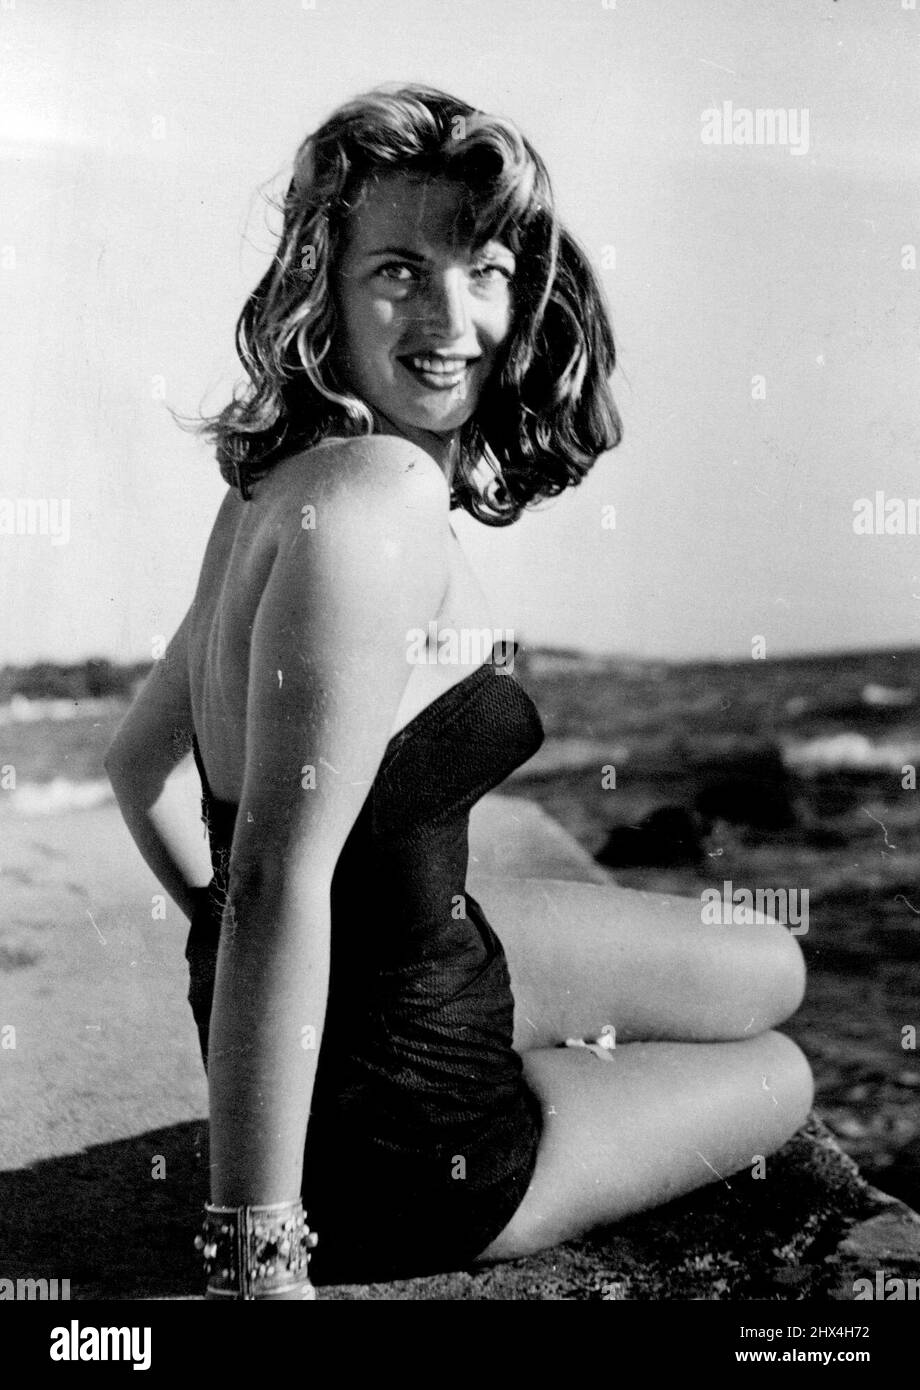 Mrs. Lotte Hass, wife of marine explorer Dr. Hans Hass of Vienna. Honey-blonde Lotte Hass who helps her husband with his daring photographic studies of fish-life the sharks. February 25, 1953. Stock Photo